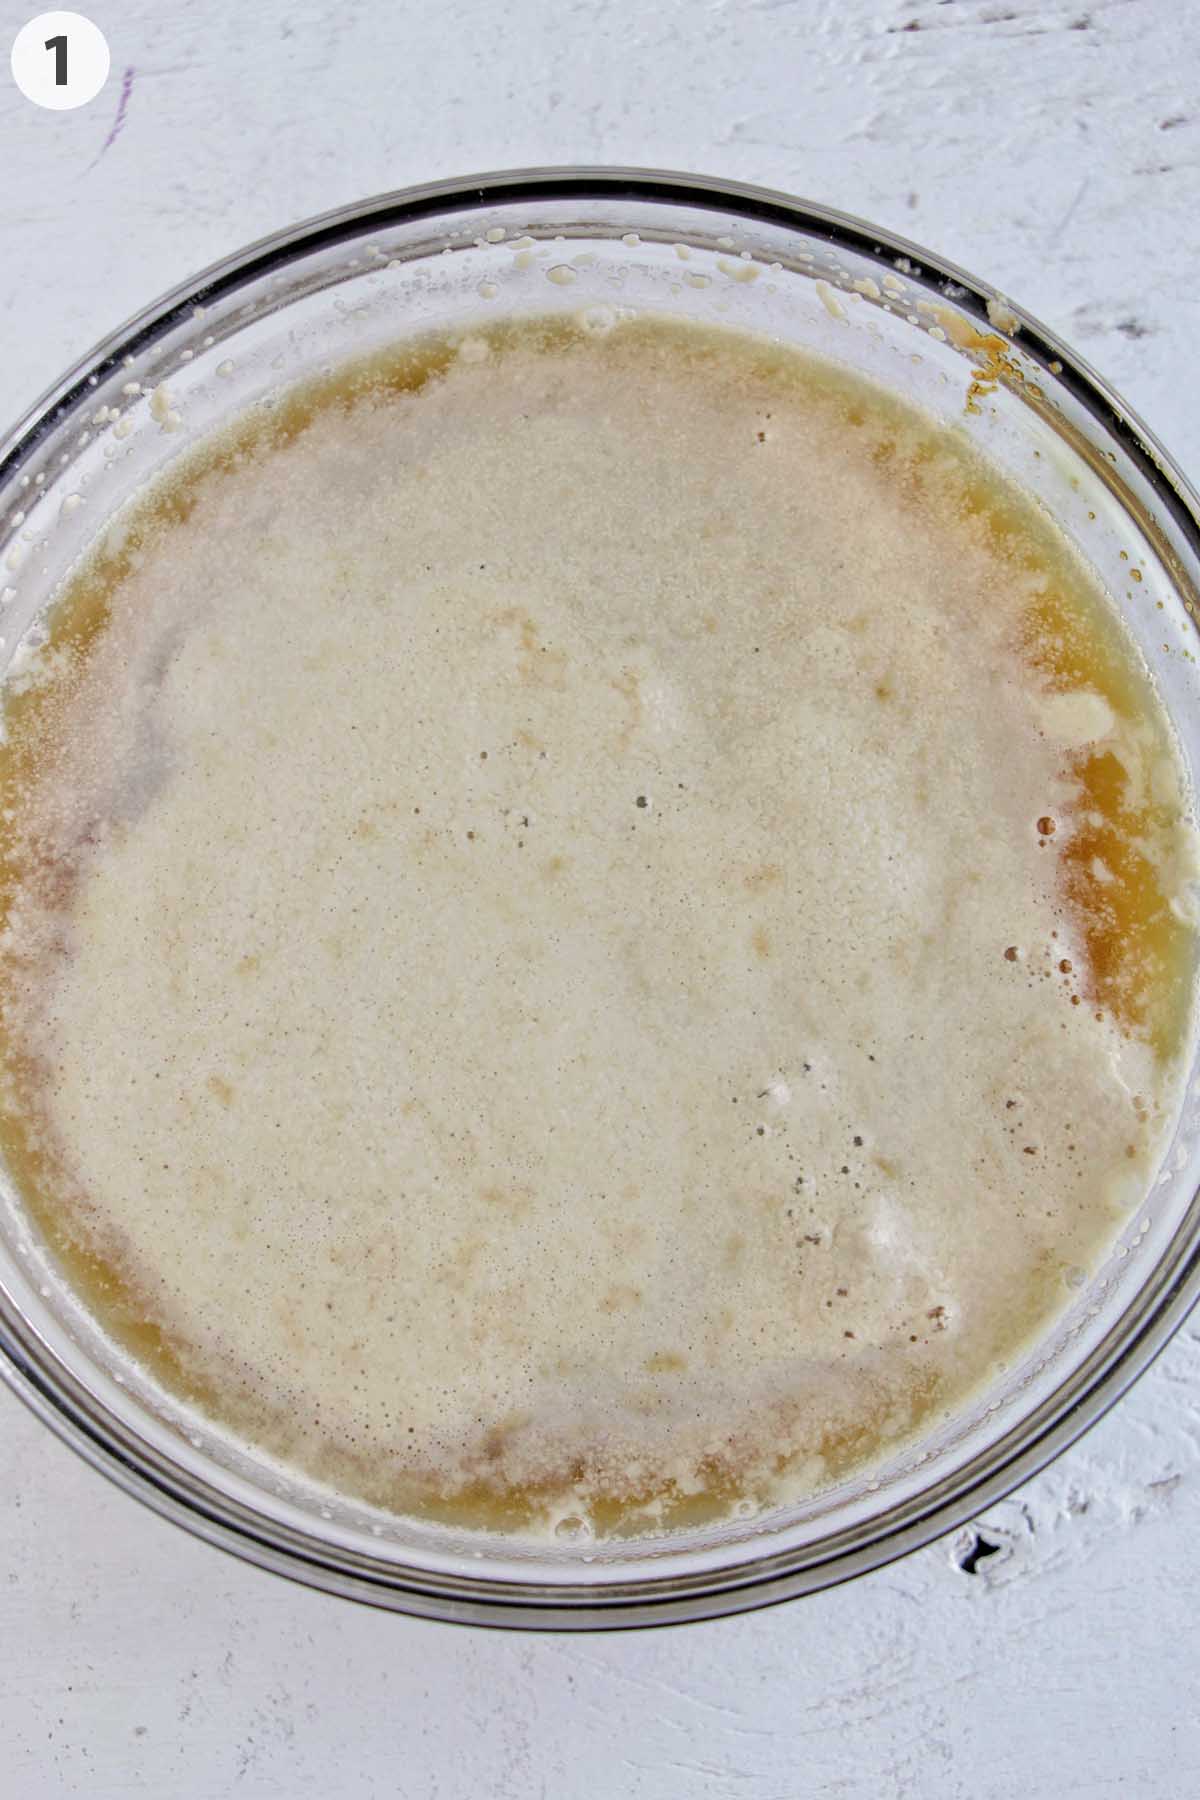 numbered photo showing yeast blooming in water.